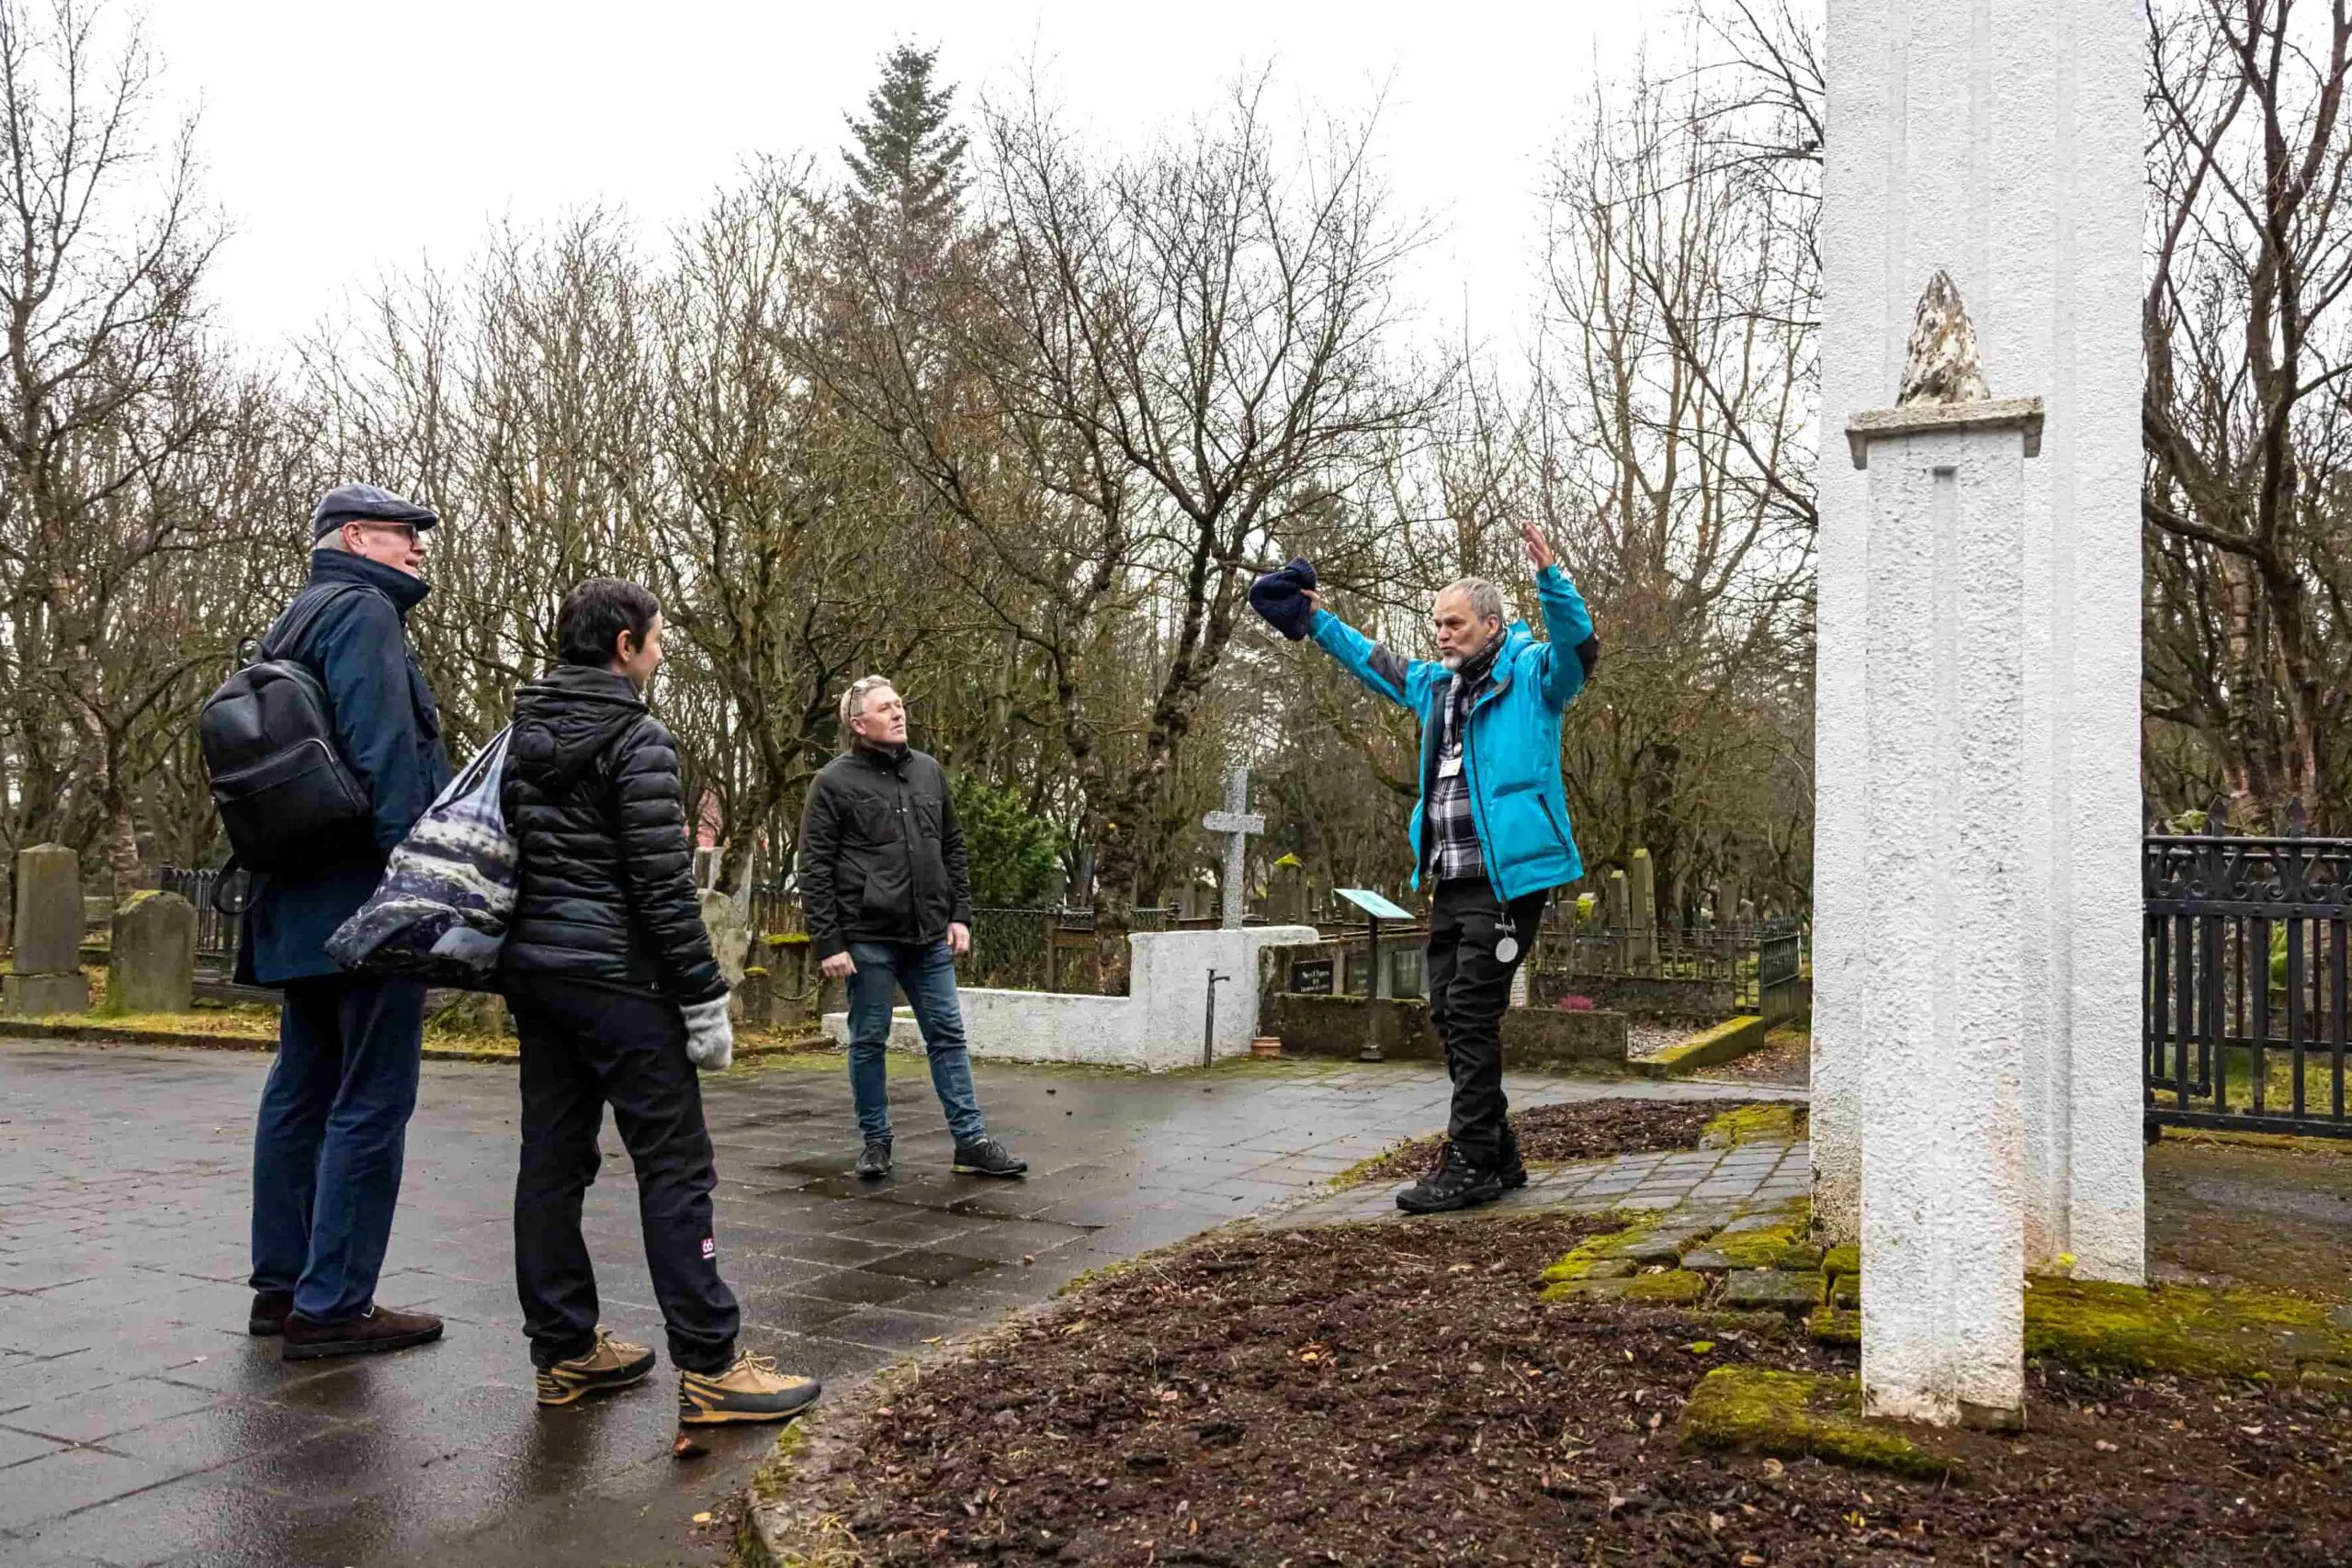 A Guide from Your Friend in Reykjavik telling a story to guests while visiting the oldest Graveyard in Iceland